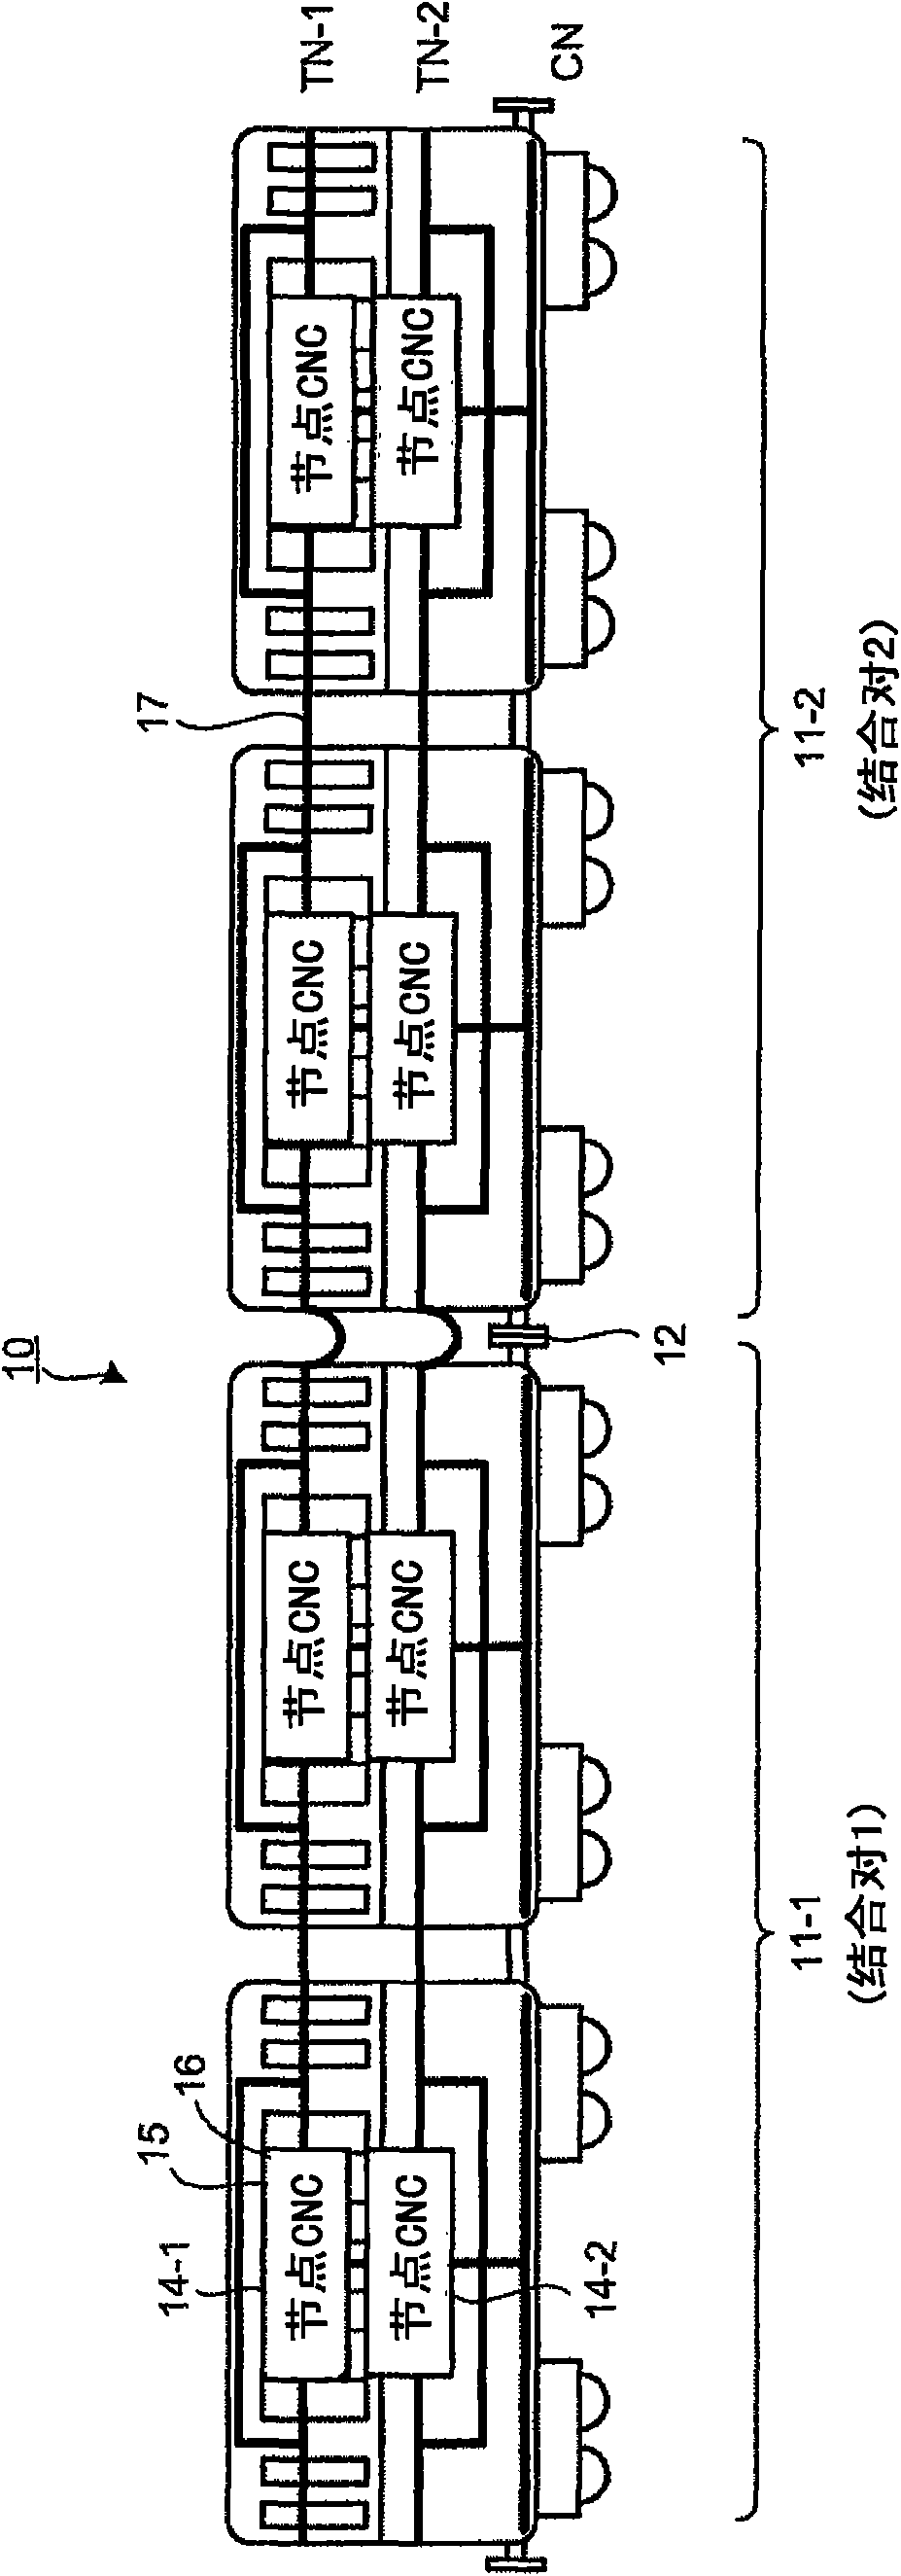 Communication apparatus for rolling stock